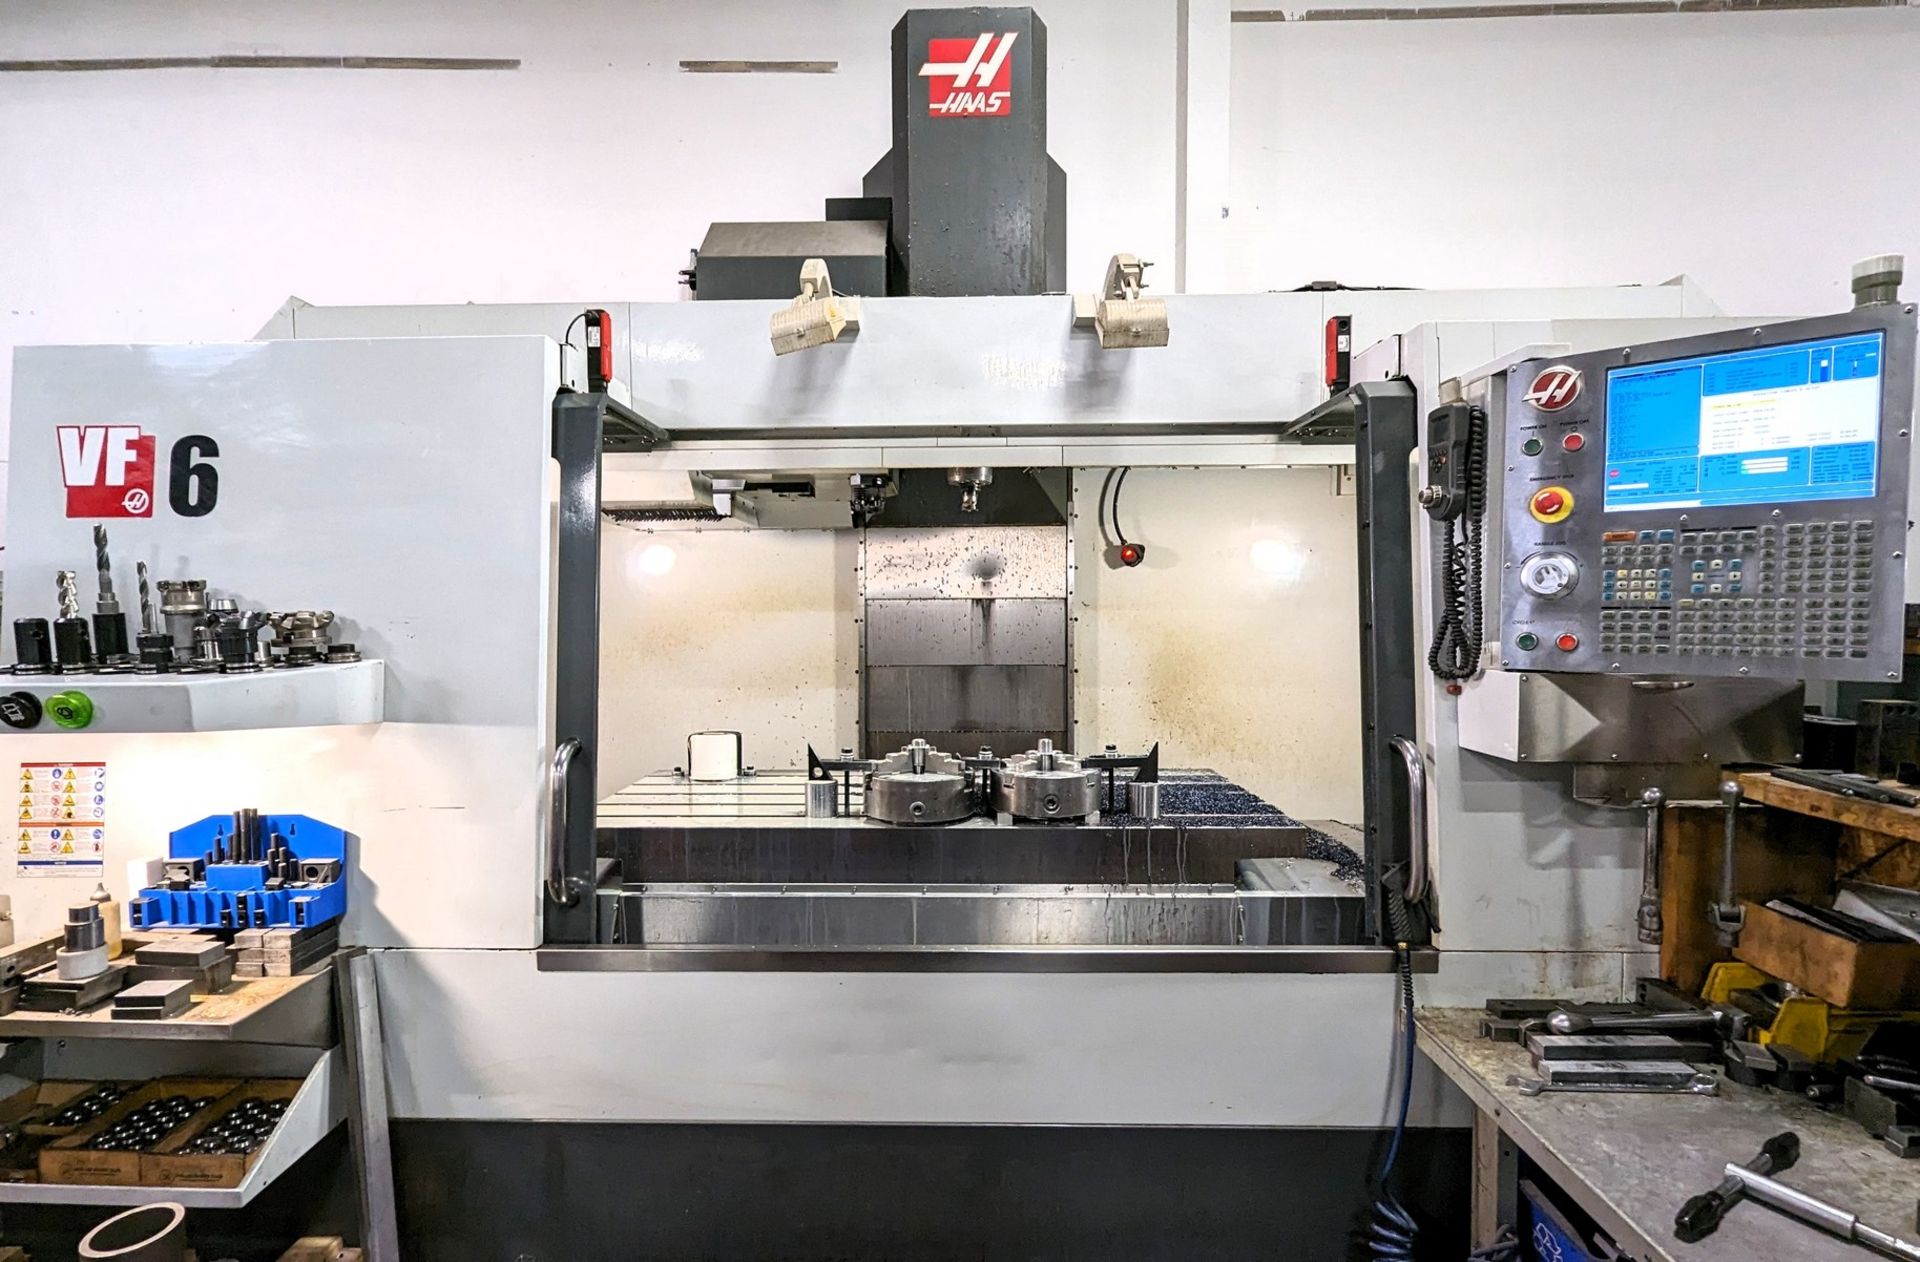 2012 HAAS VF6/40 CNC VERTICAL MACHINING CENTER, CNC CONTROL, 24” X 60” TABLE, 40 TAPER, 10,000 RPM - Image 2 of 25